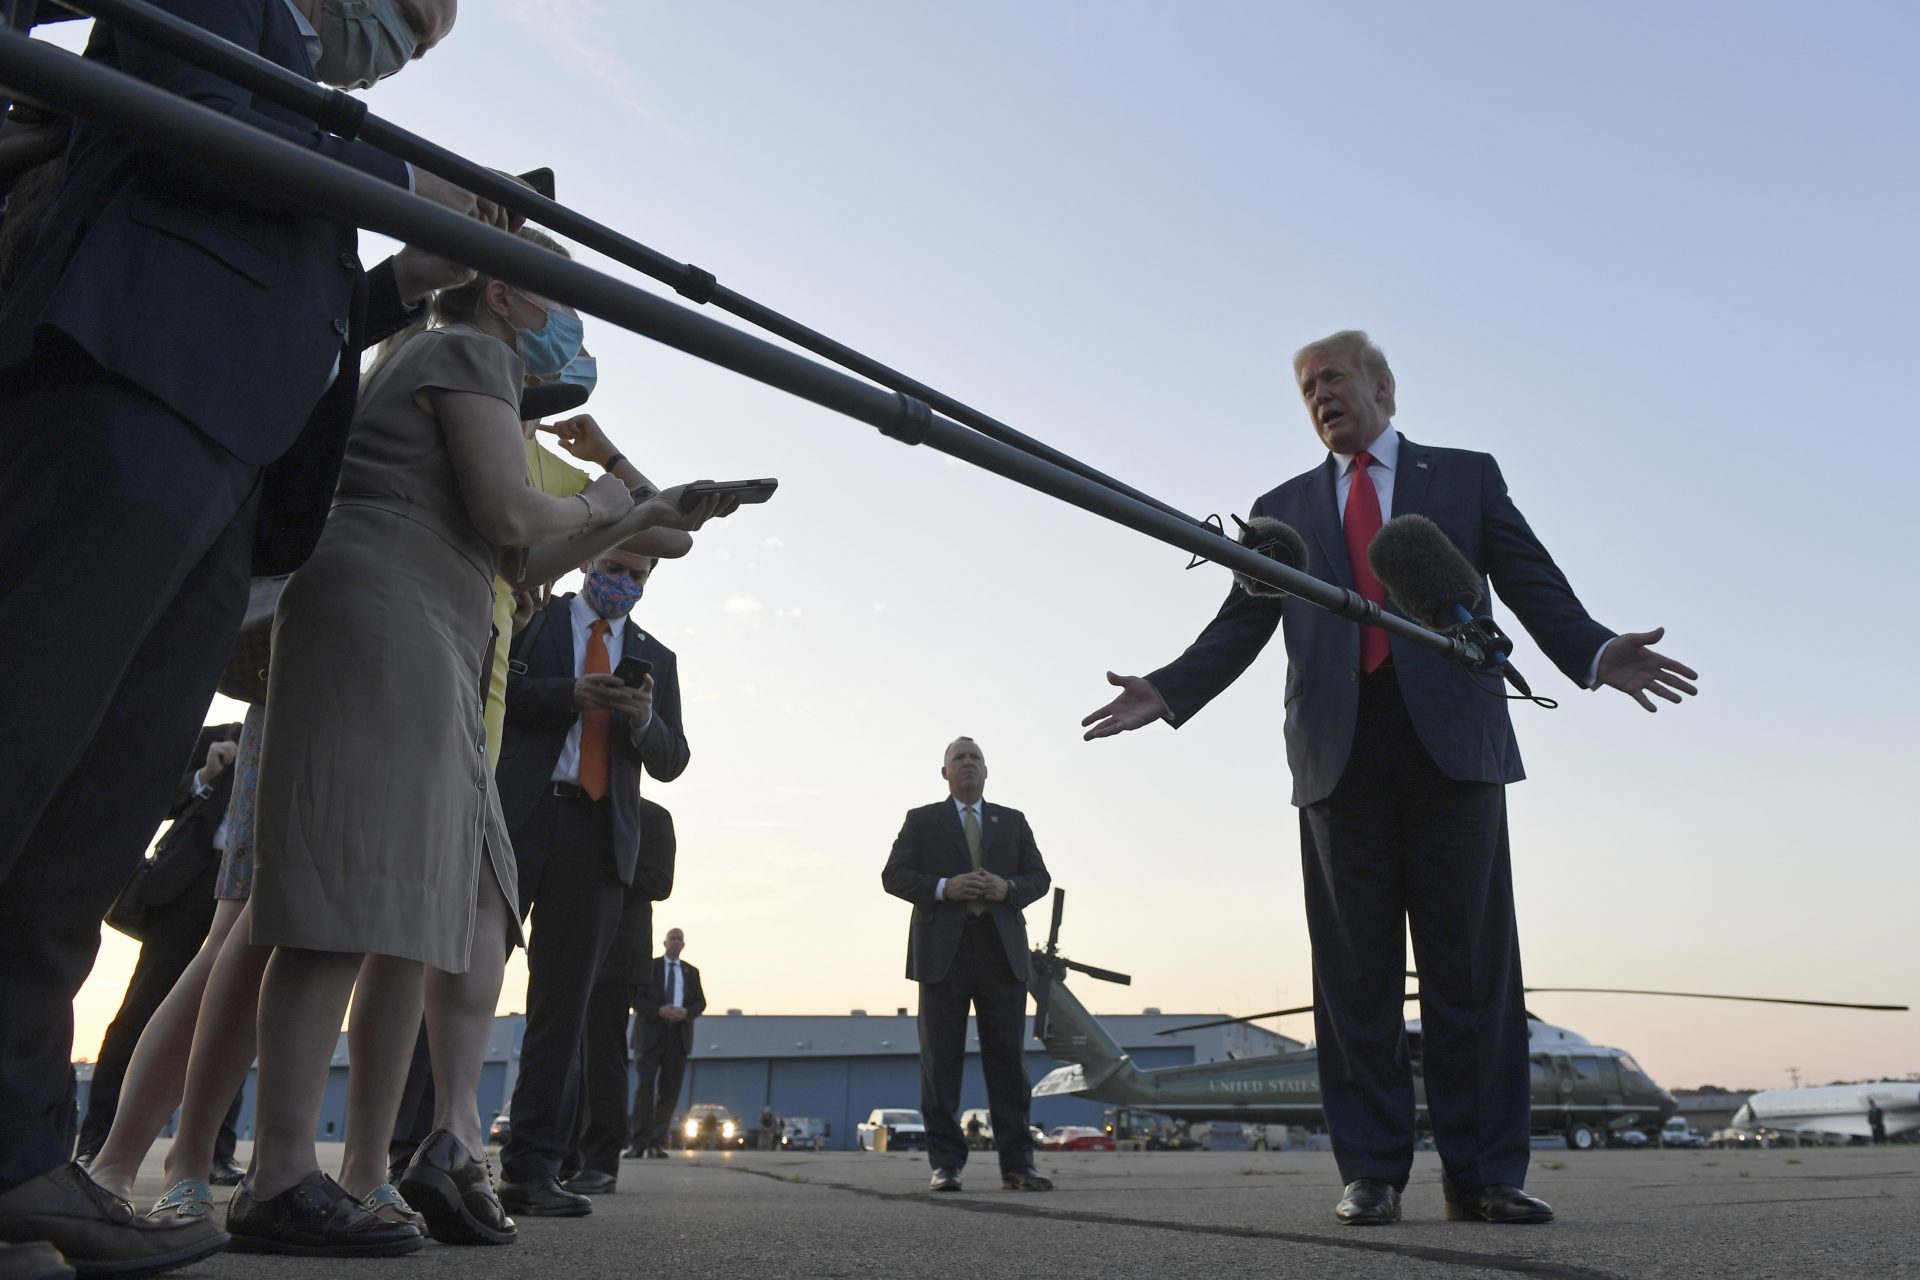 President Donald Trump talks with reporters before departing from Morristown Municipal Airport in Morristown, N.J., Sunday, Aug. 9, 2020. Trump is returning to Washington after spending the weekend at the Trump National Golf Club.